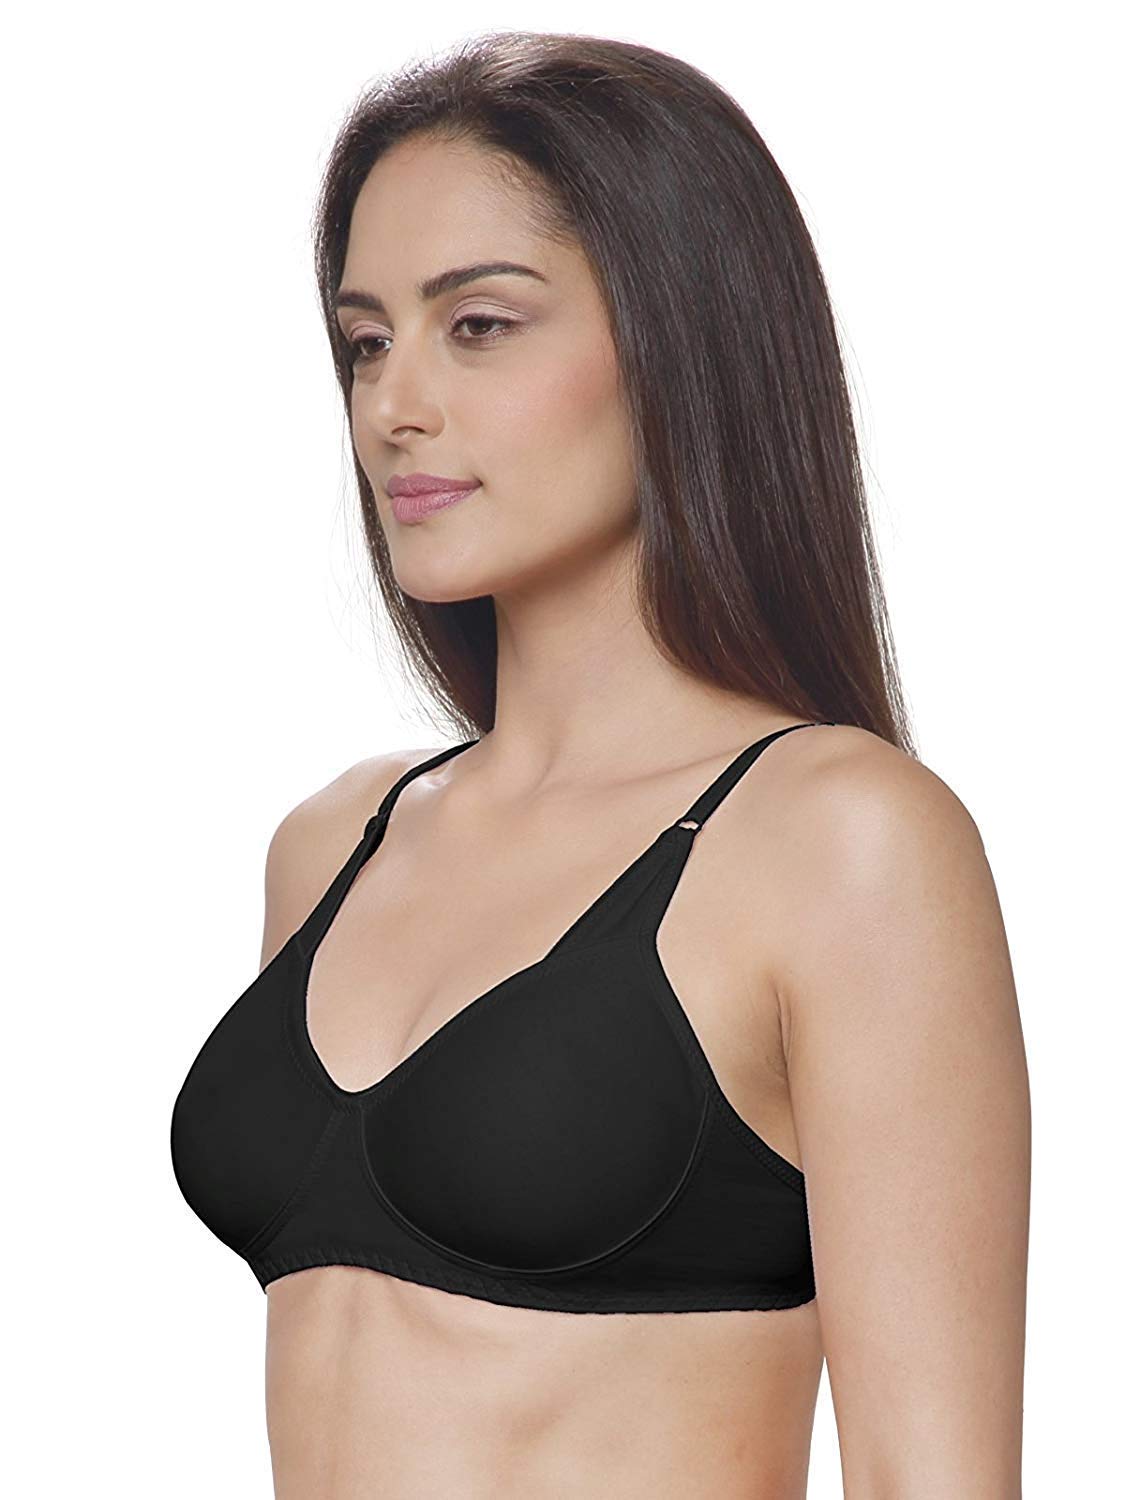 Lovable Black and Skin Non Padded Wirefree Bra Pack of 2 - ADL 13-BLACK/SKIN